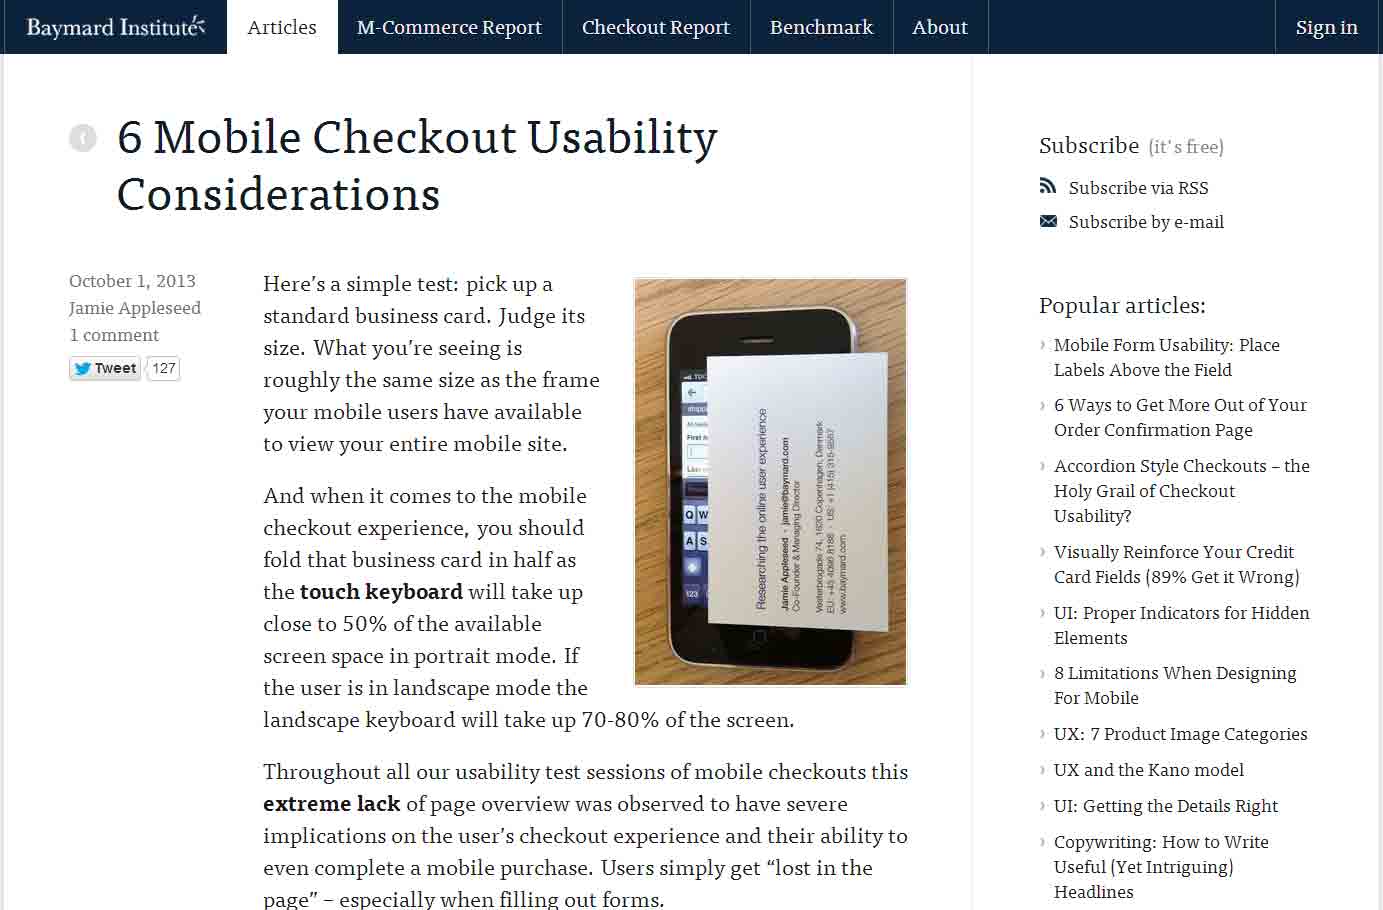 6 Mobile Checkout Usability Considerations